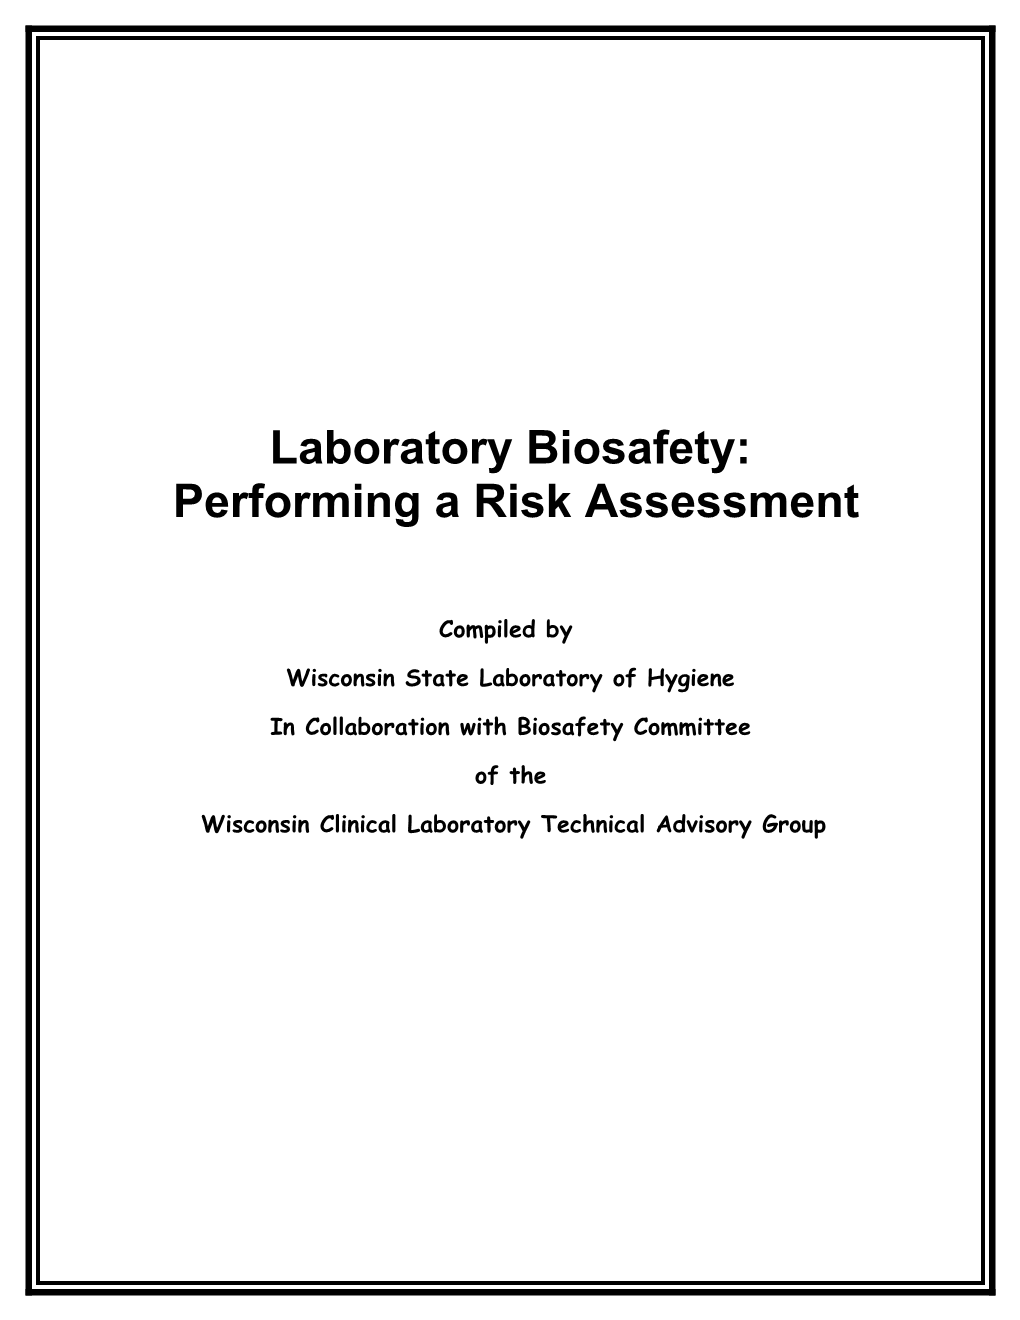 Laboratory Biosafety: Performing a Risk Assessment